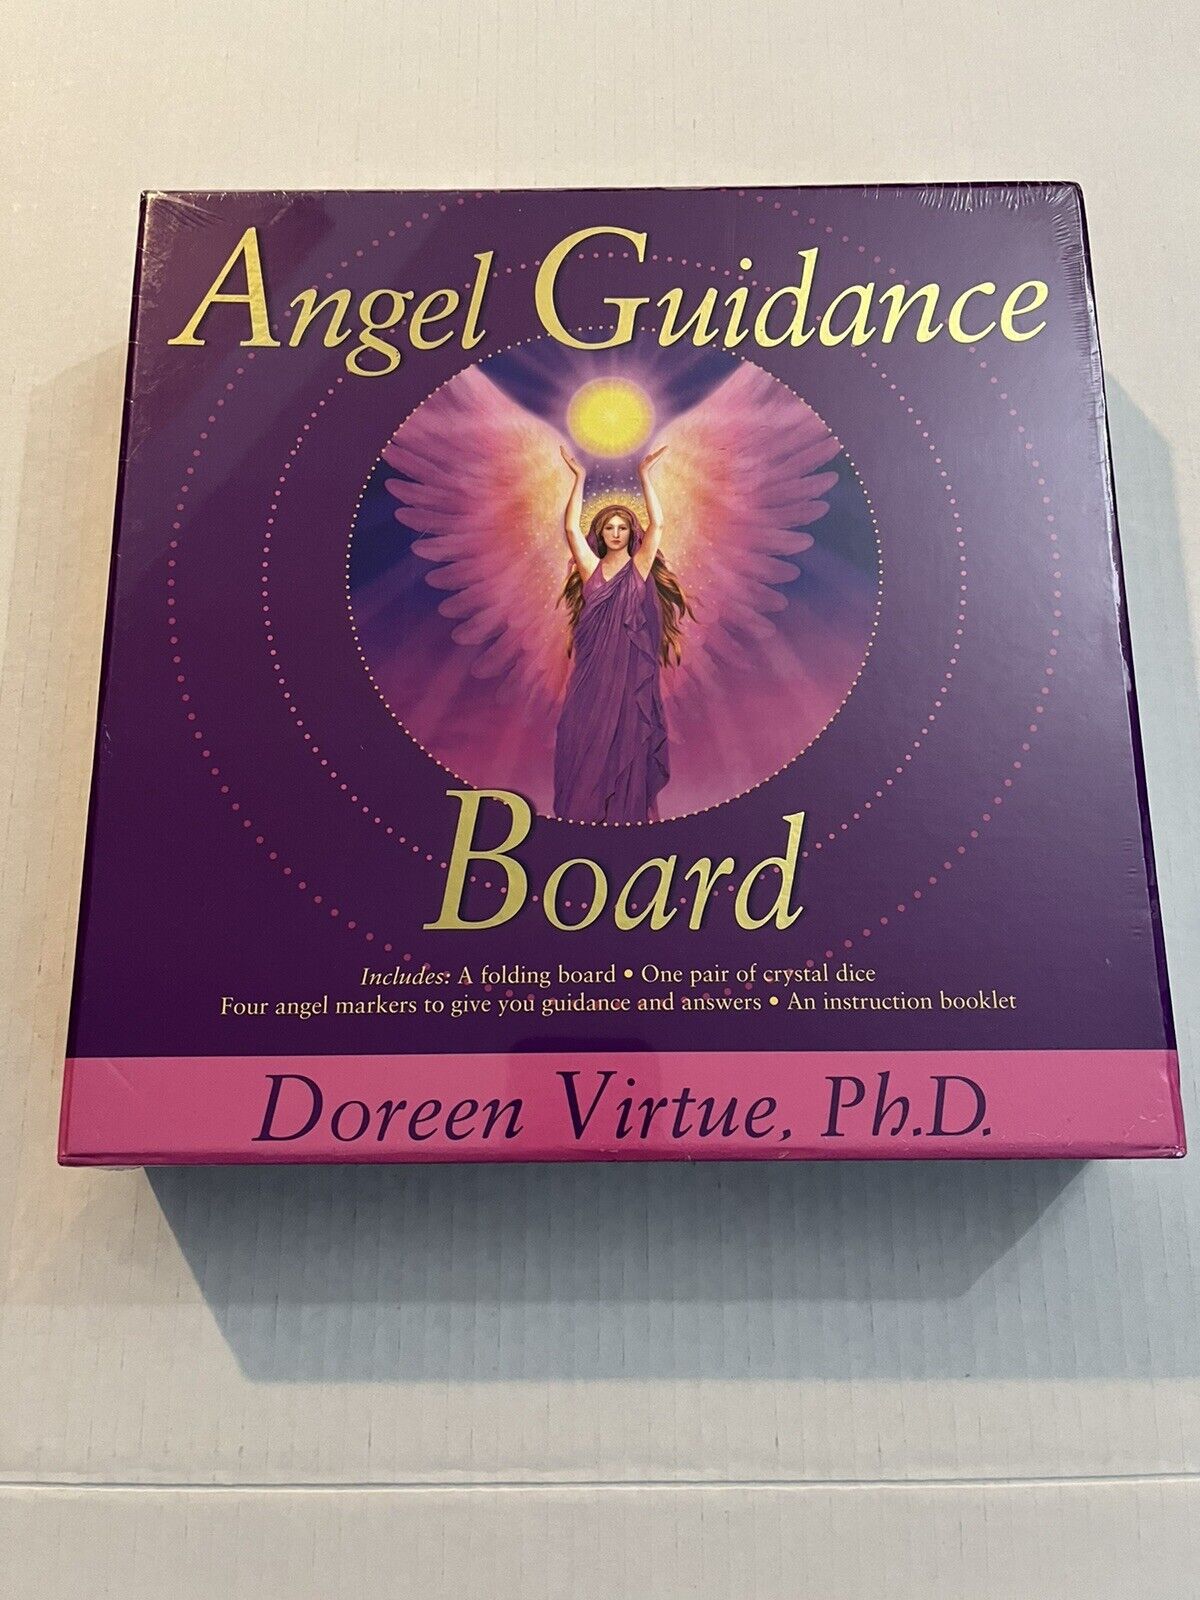 Angel Guidance Board Doreen Virtue 2004 Crystal Dice Booklet Brand New Sealed